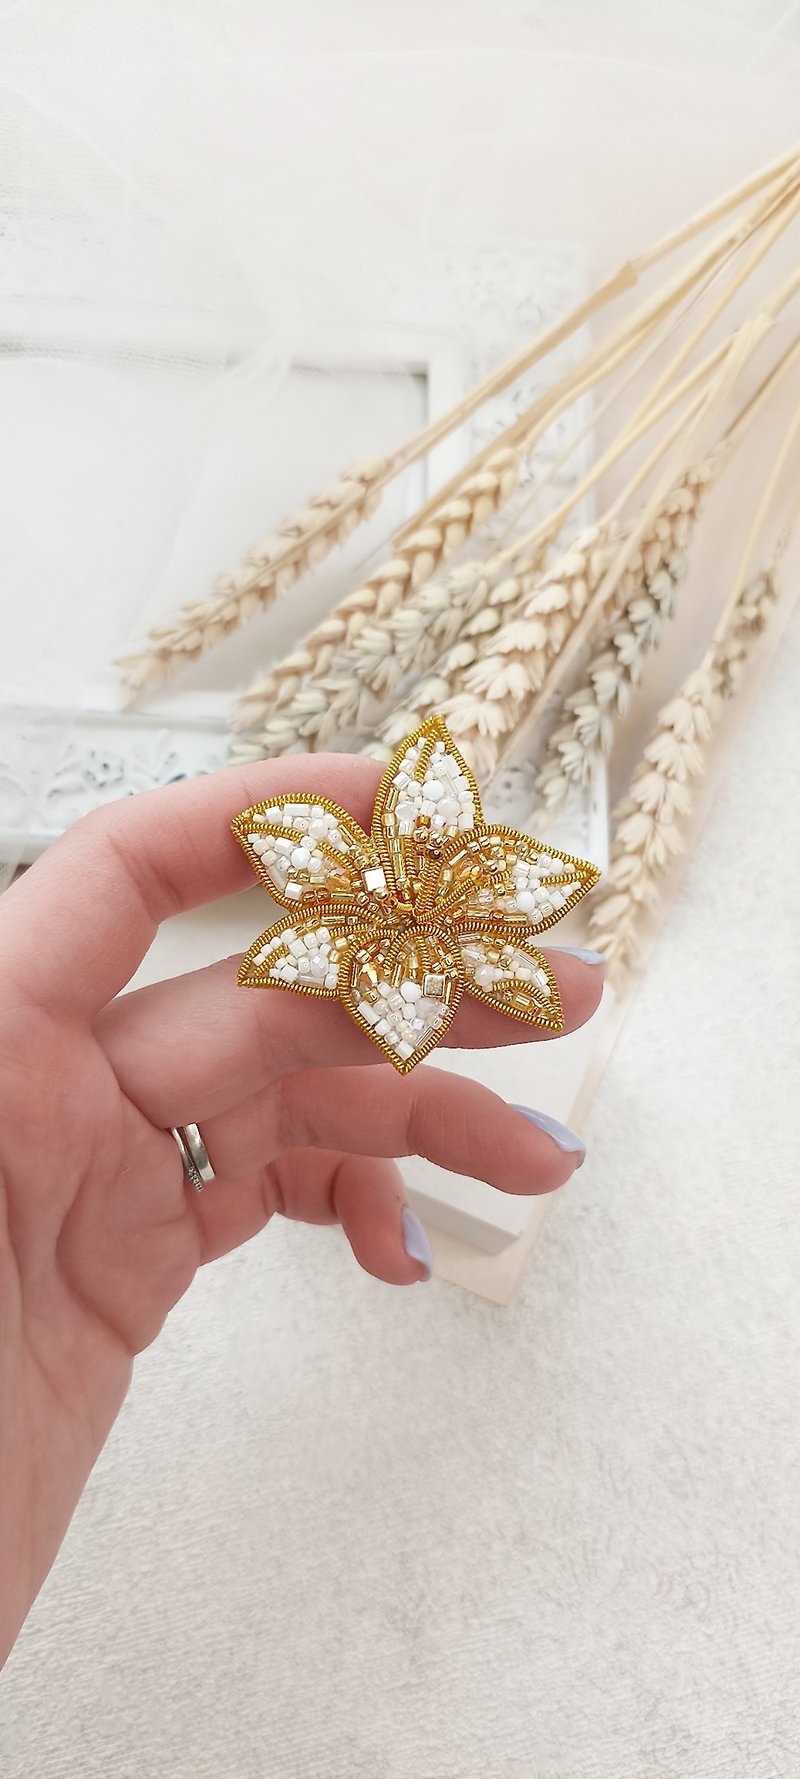 delicate flower pin as a gift, hand-embroidered white and gold flower brooch - 胸針 - 不鏽鋼 白色